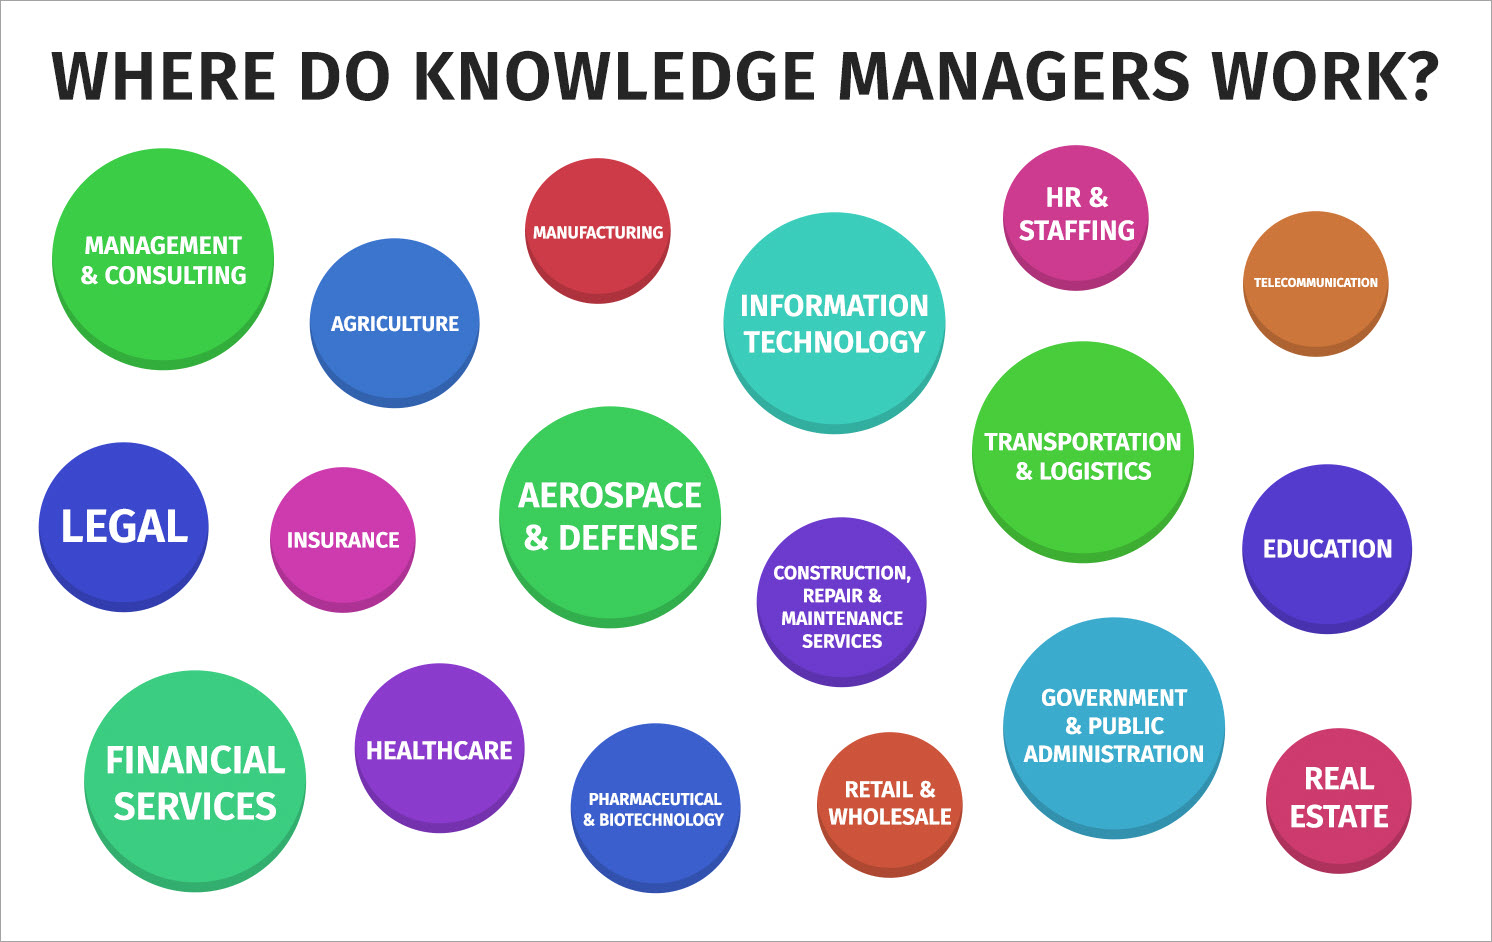 Where do knowledge managers work